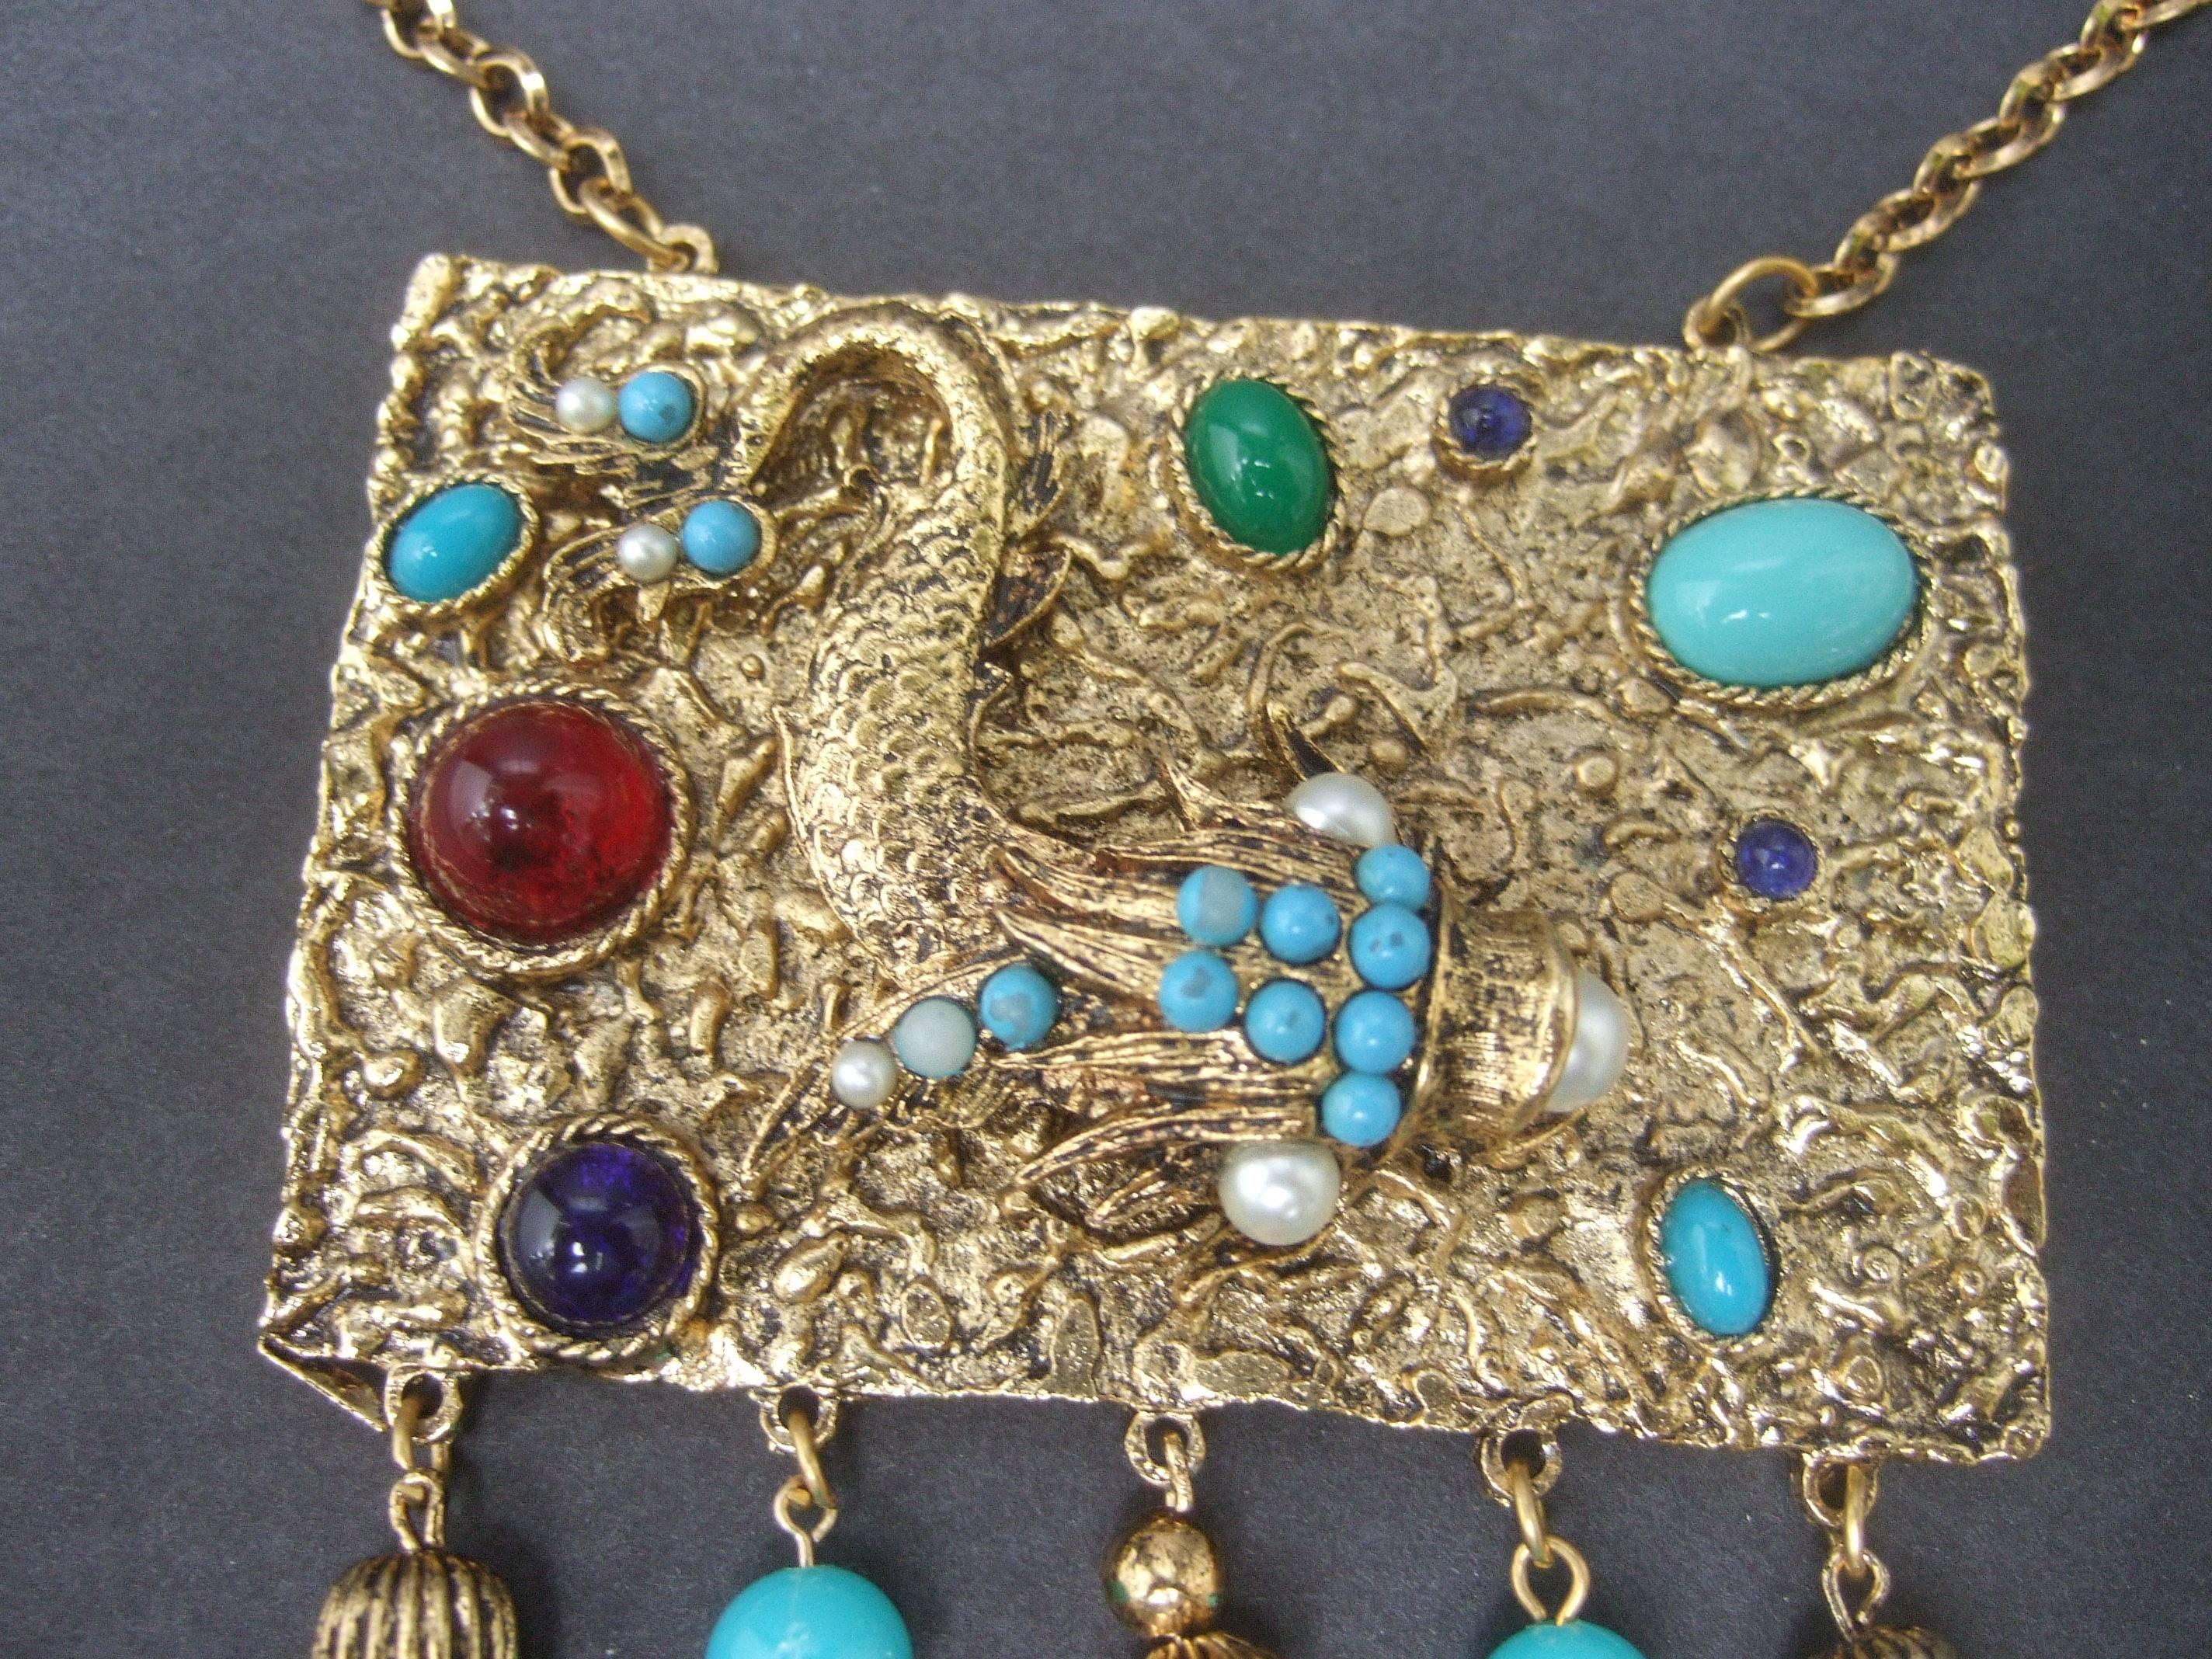 Exotic Jeweled Serpent Pendant Necklace ca 1970  In Good Condition For Sale In University City, MO